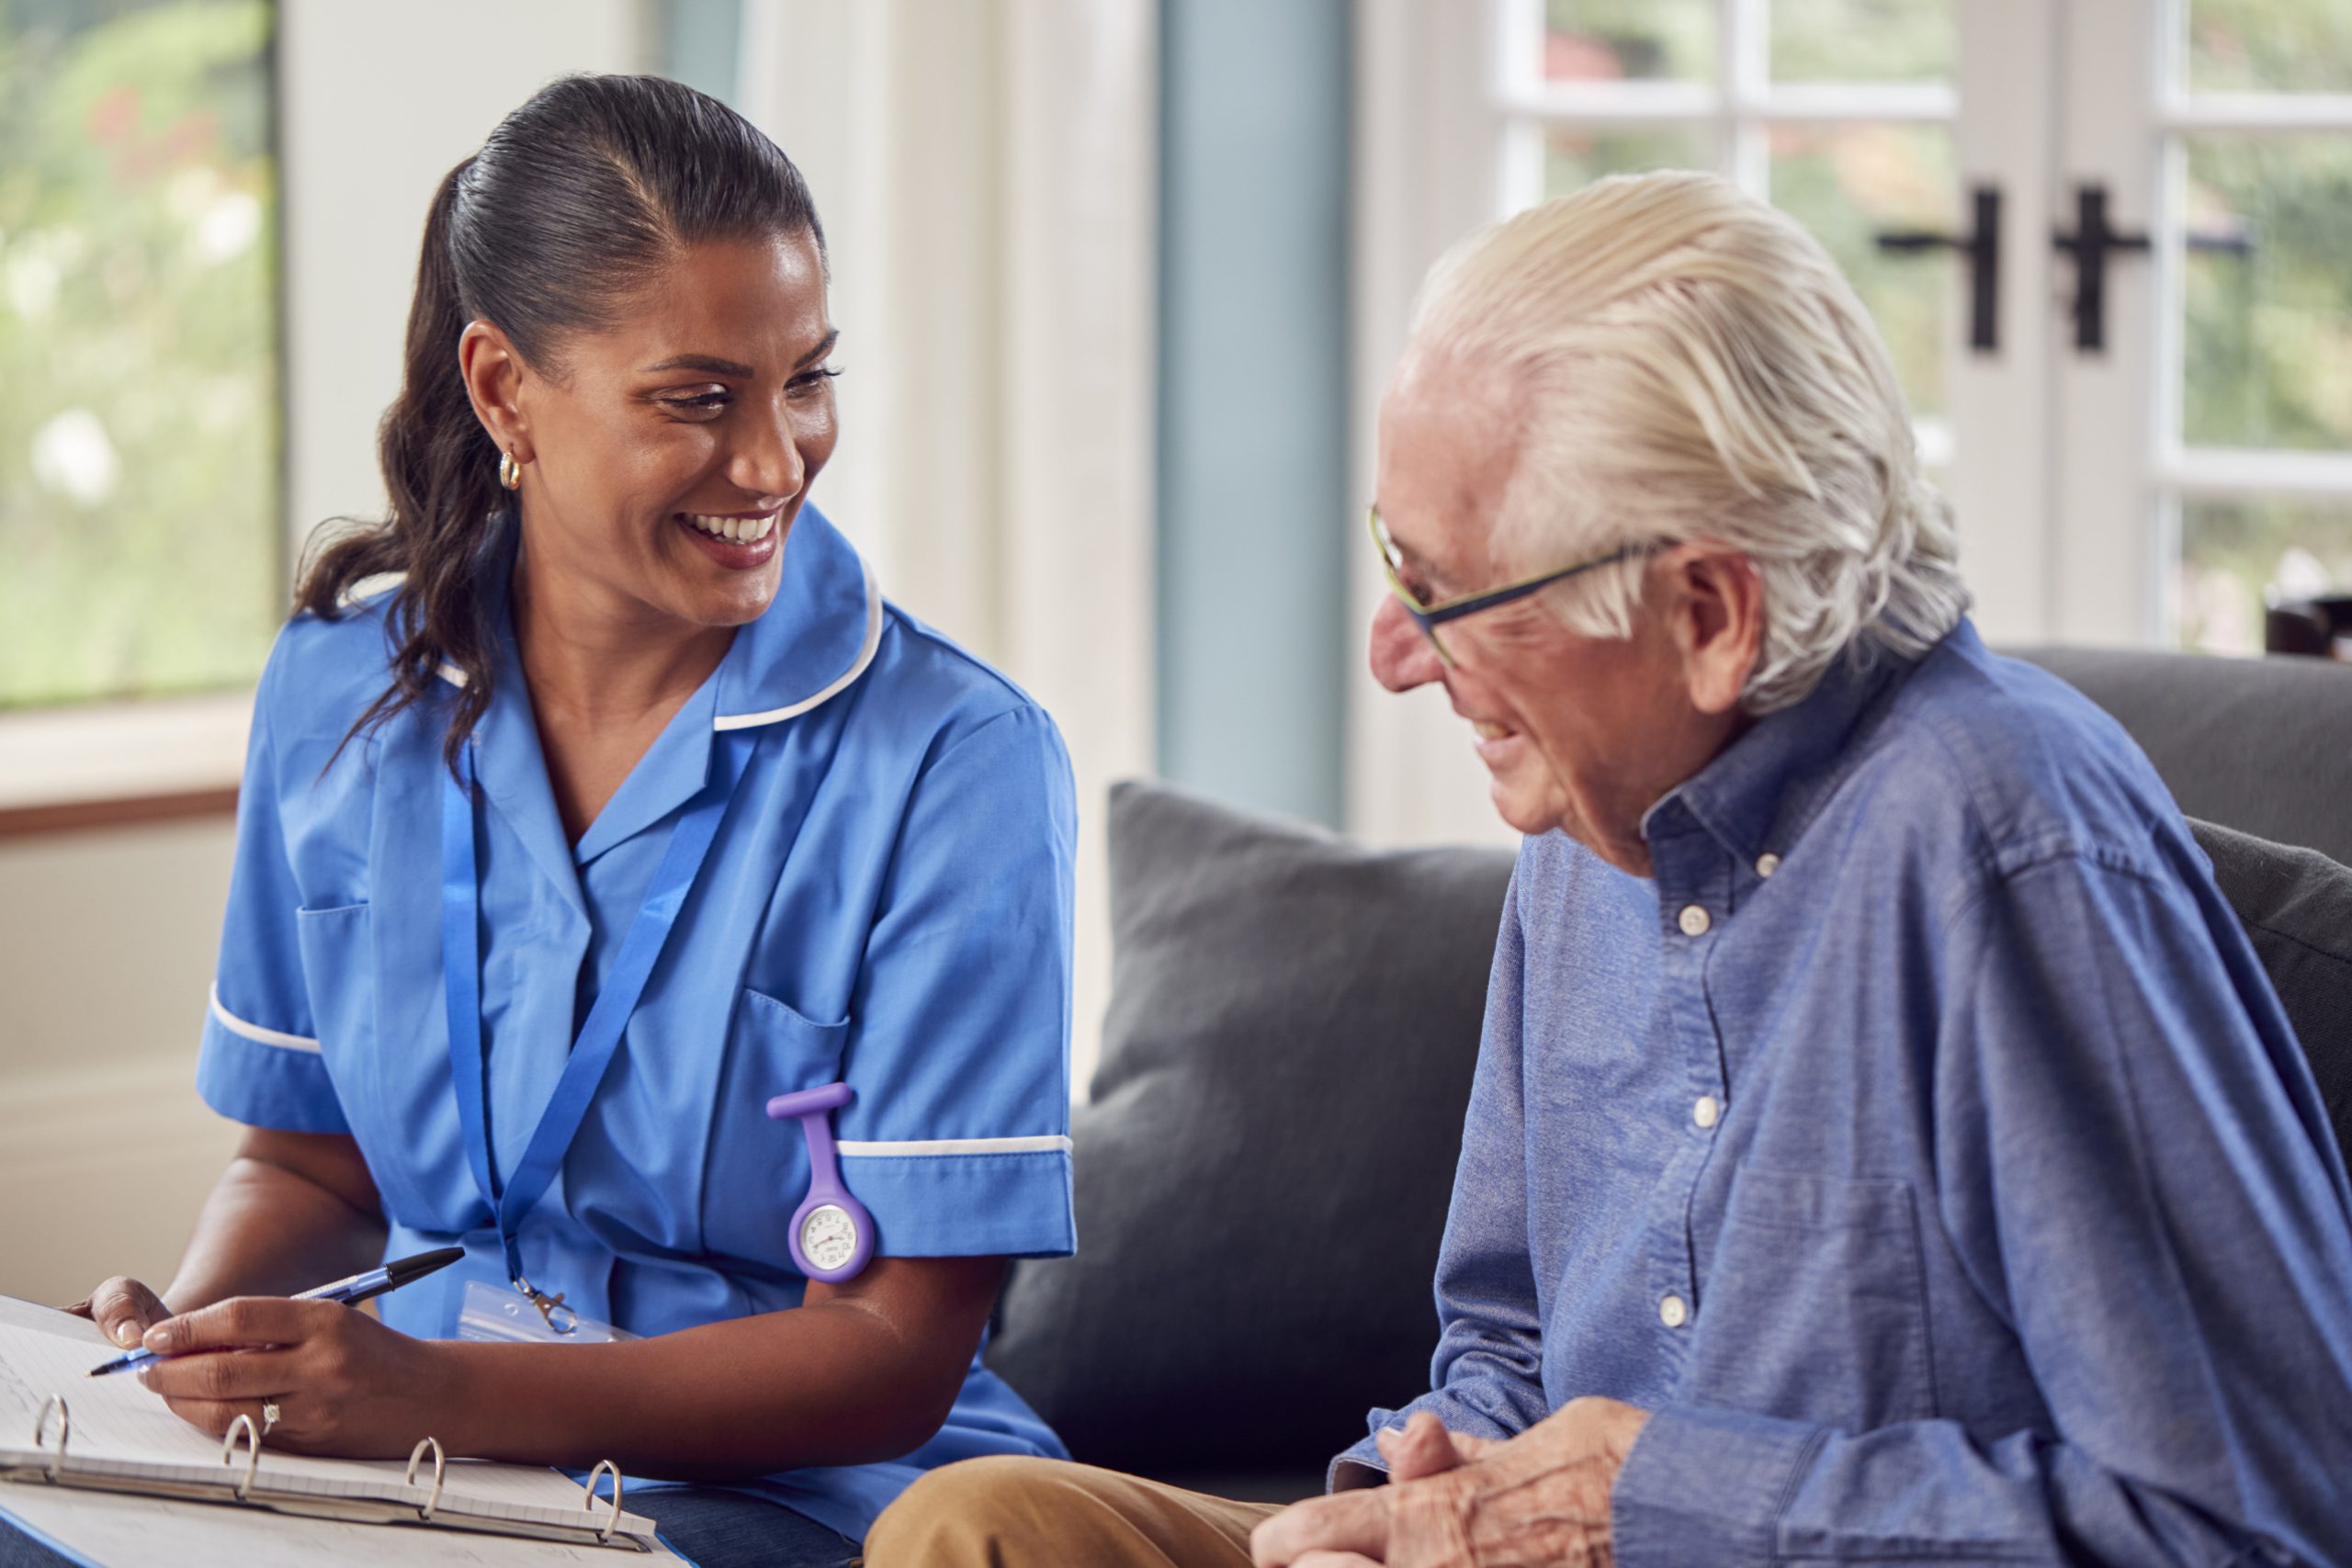 Guide to Mandatory Care Time Standards & 24/7 Registered Nurses in Aged Care